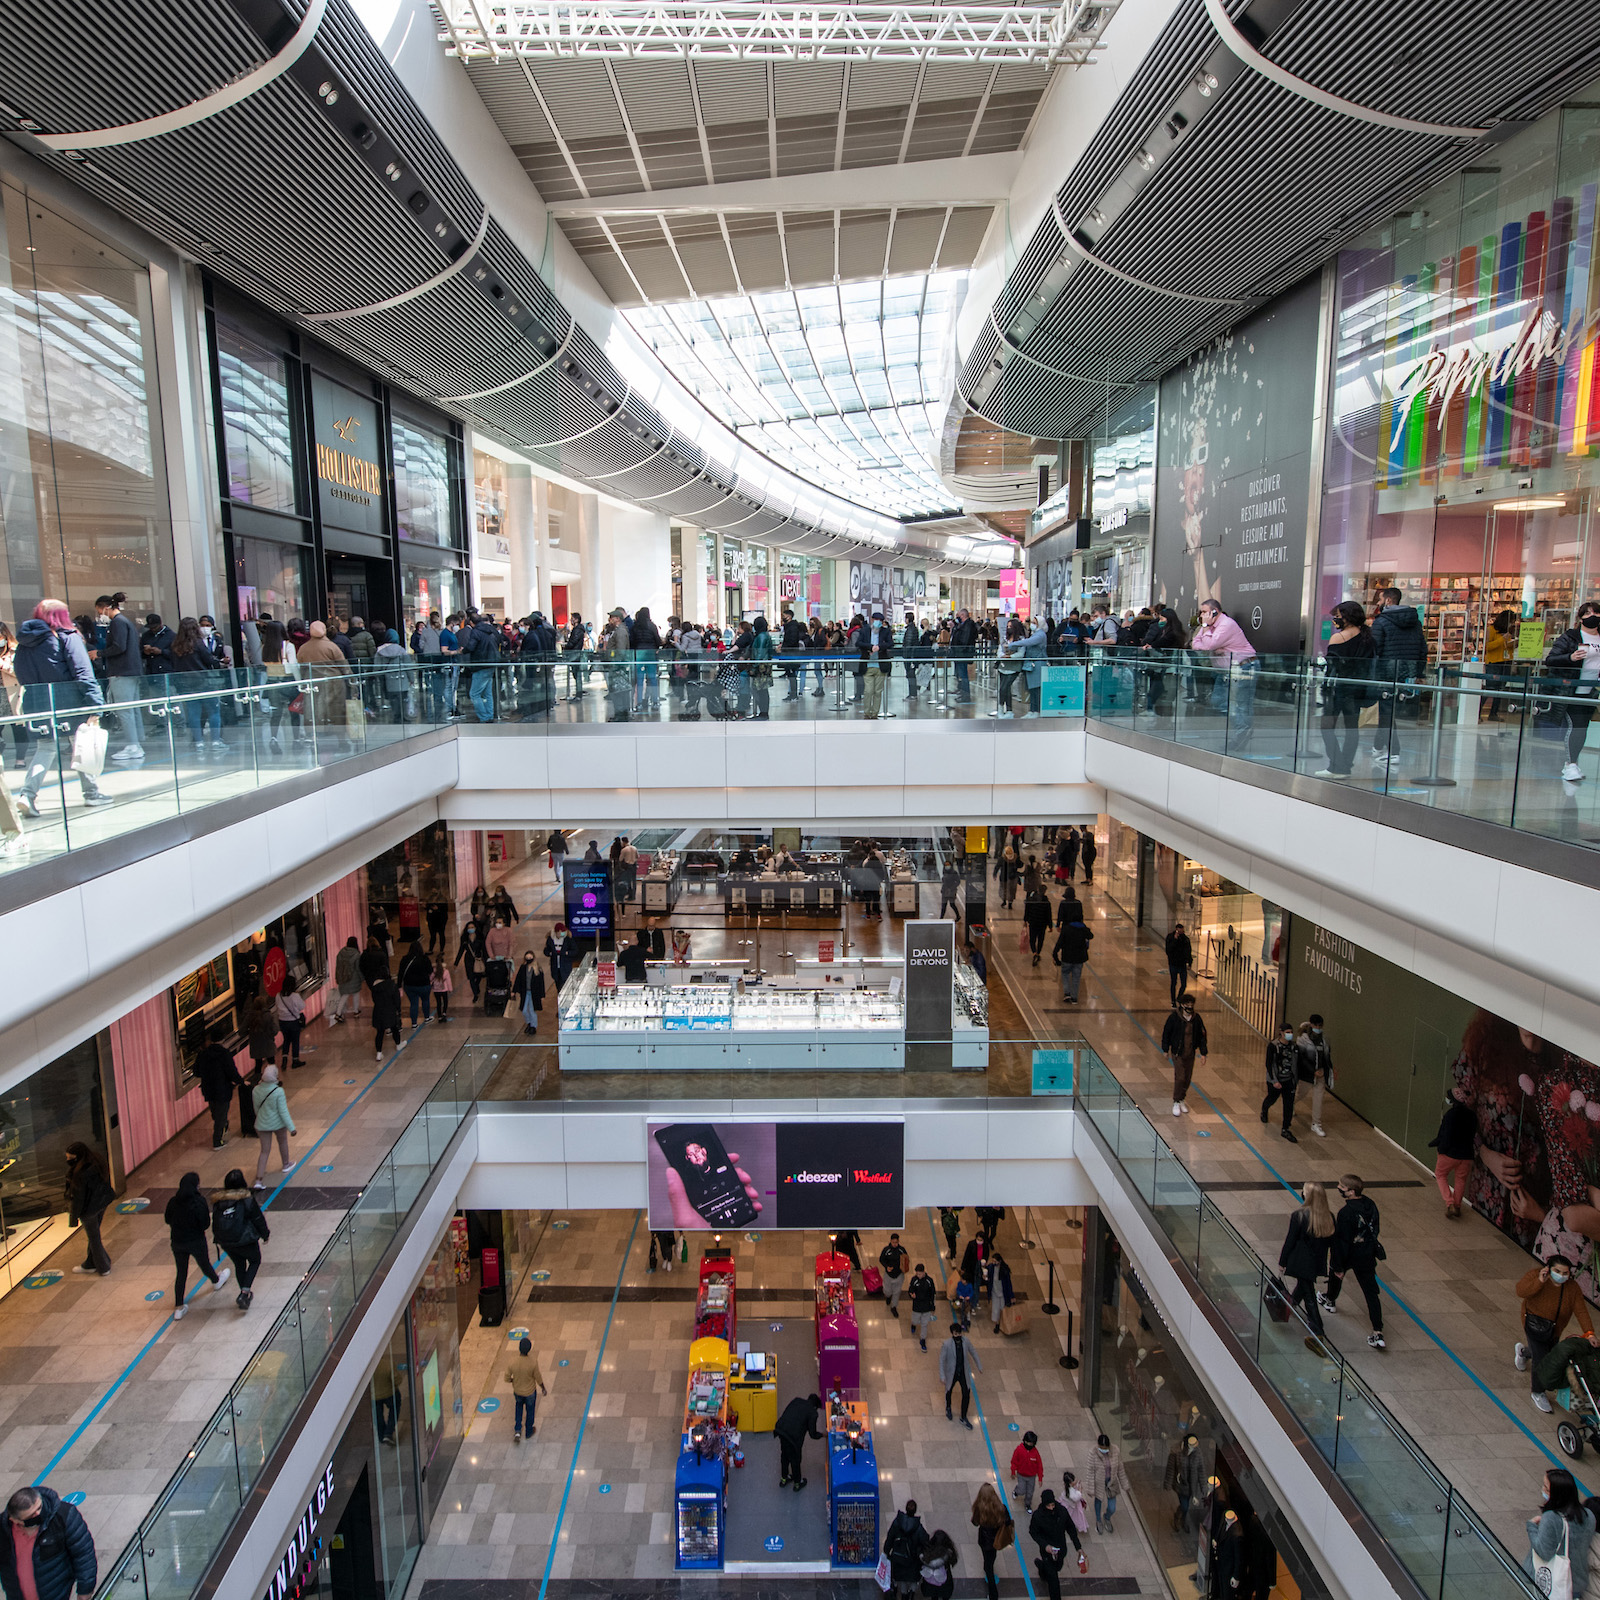 Westfield Stratford City on Twitter: "Bank Holiday weekend is here! 🌞  We're open as normal, but don't forget that individual store hours may vary  🛍️ Saturday: 9am - 9pm Sunday: 12pm -